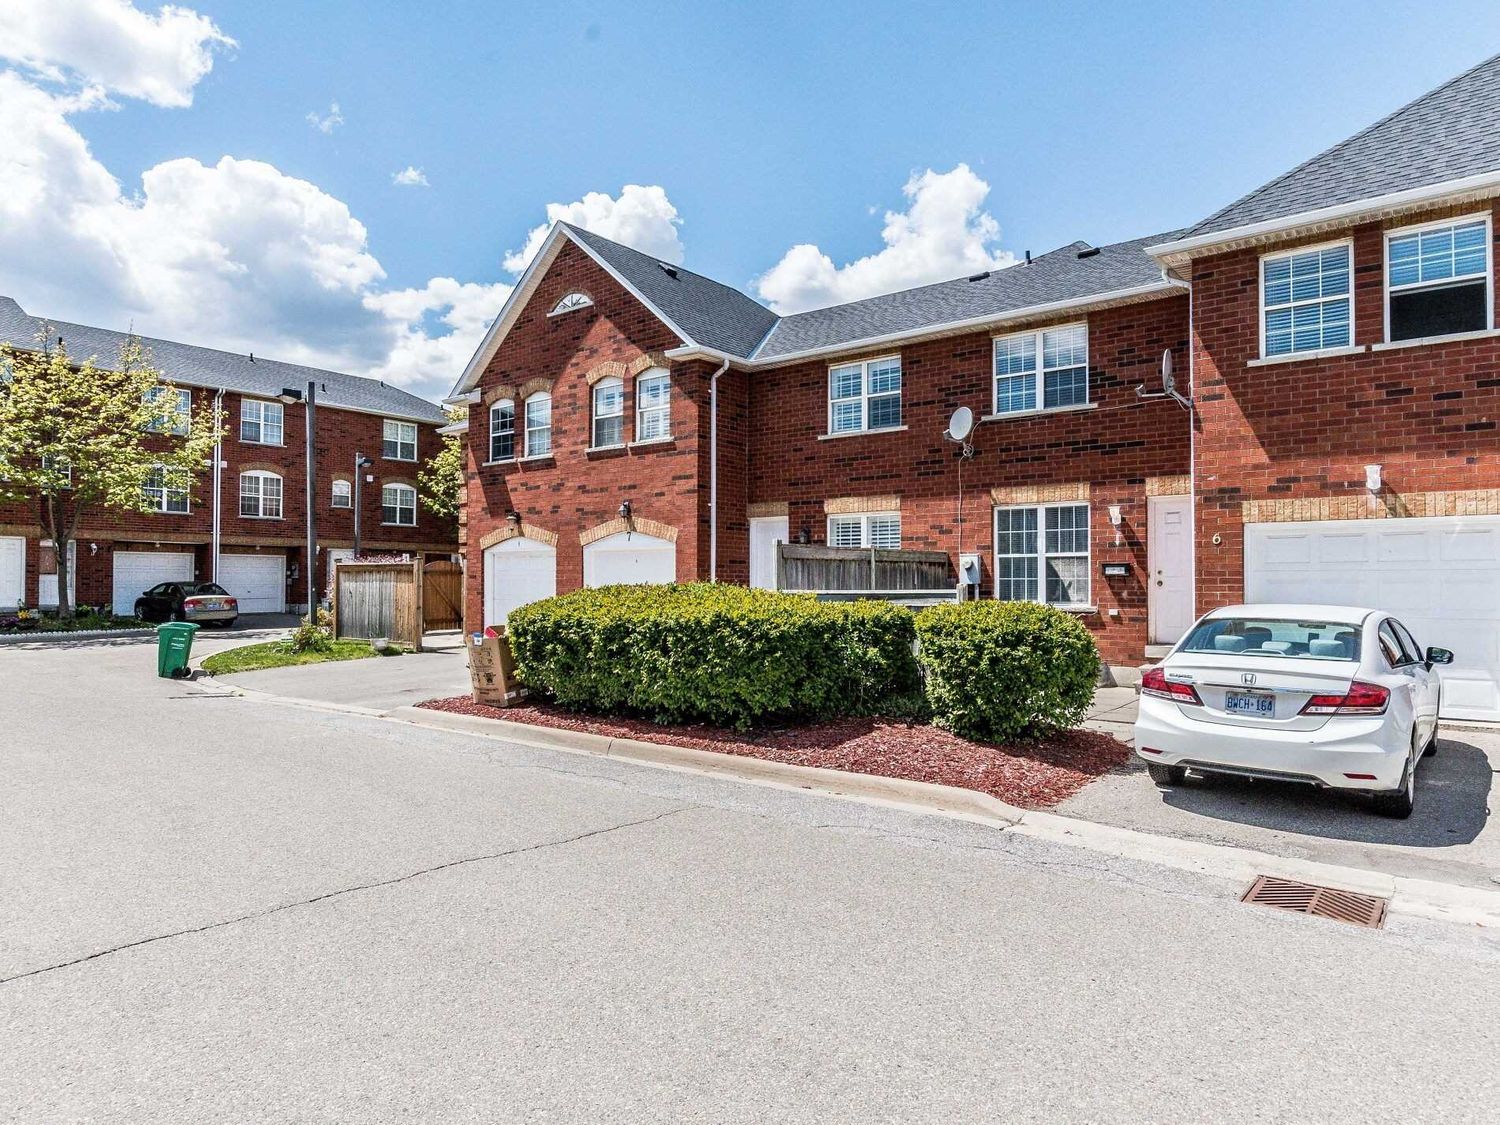 6860 Meadowvale Town Centre Cir. 6860 Meadowvale Townhomes is located in  Mississauga, Toronto - image #2 of 2